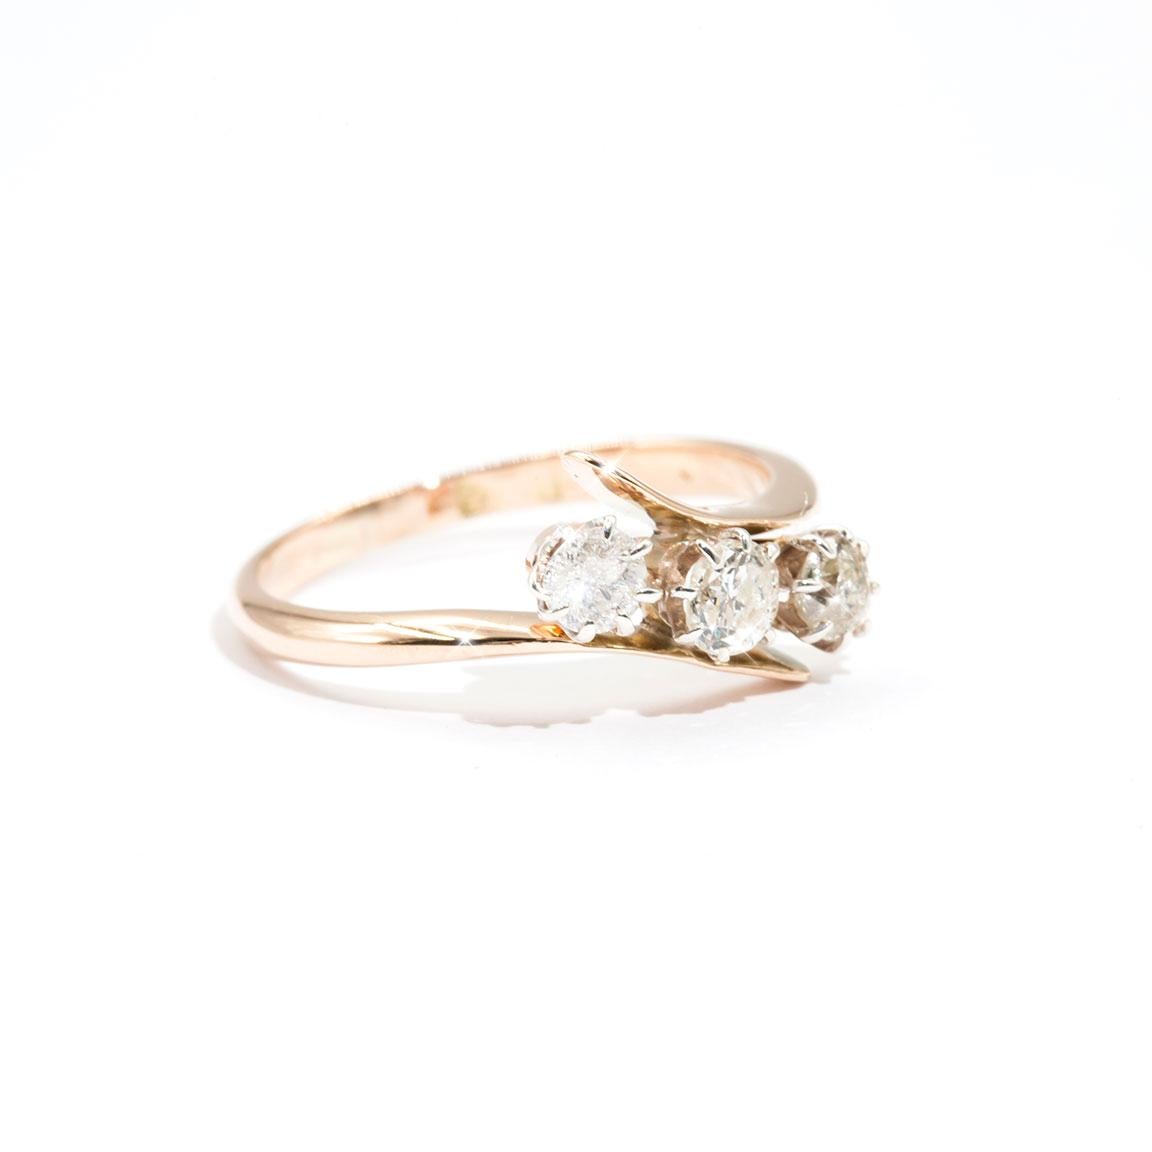 Carefully crafted in 9 carat rose gold is this crossover 3 stone vintage ring featuring three charming old cut diamonds. We have named this darling vintage ring The Edith Ring. The Edith Ring invokes romance and nostalgia, and would make a charming